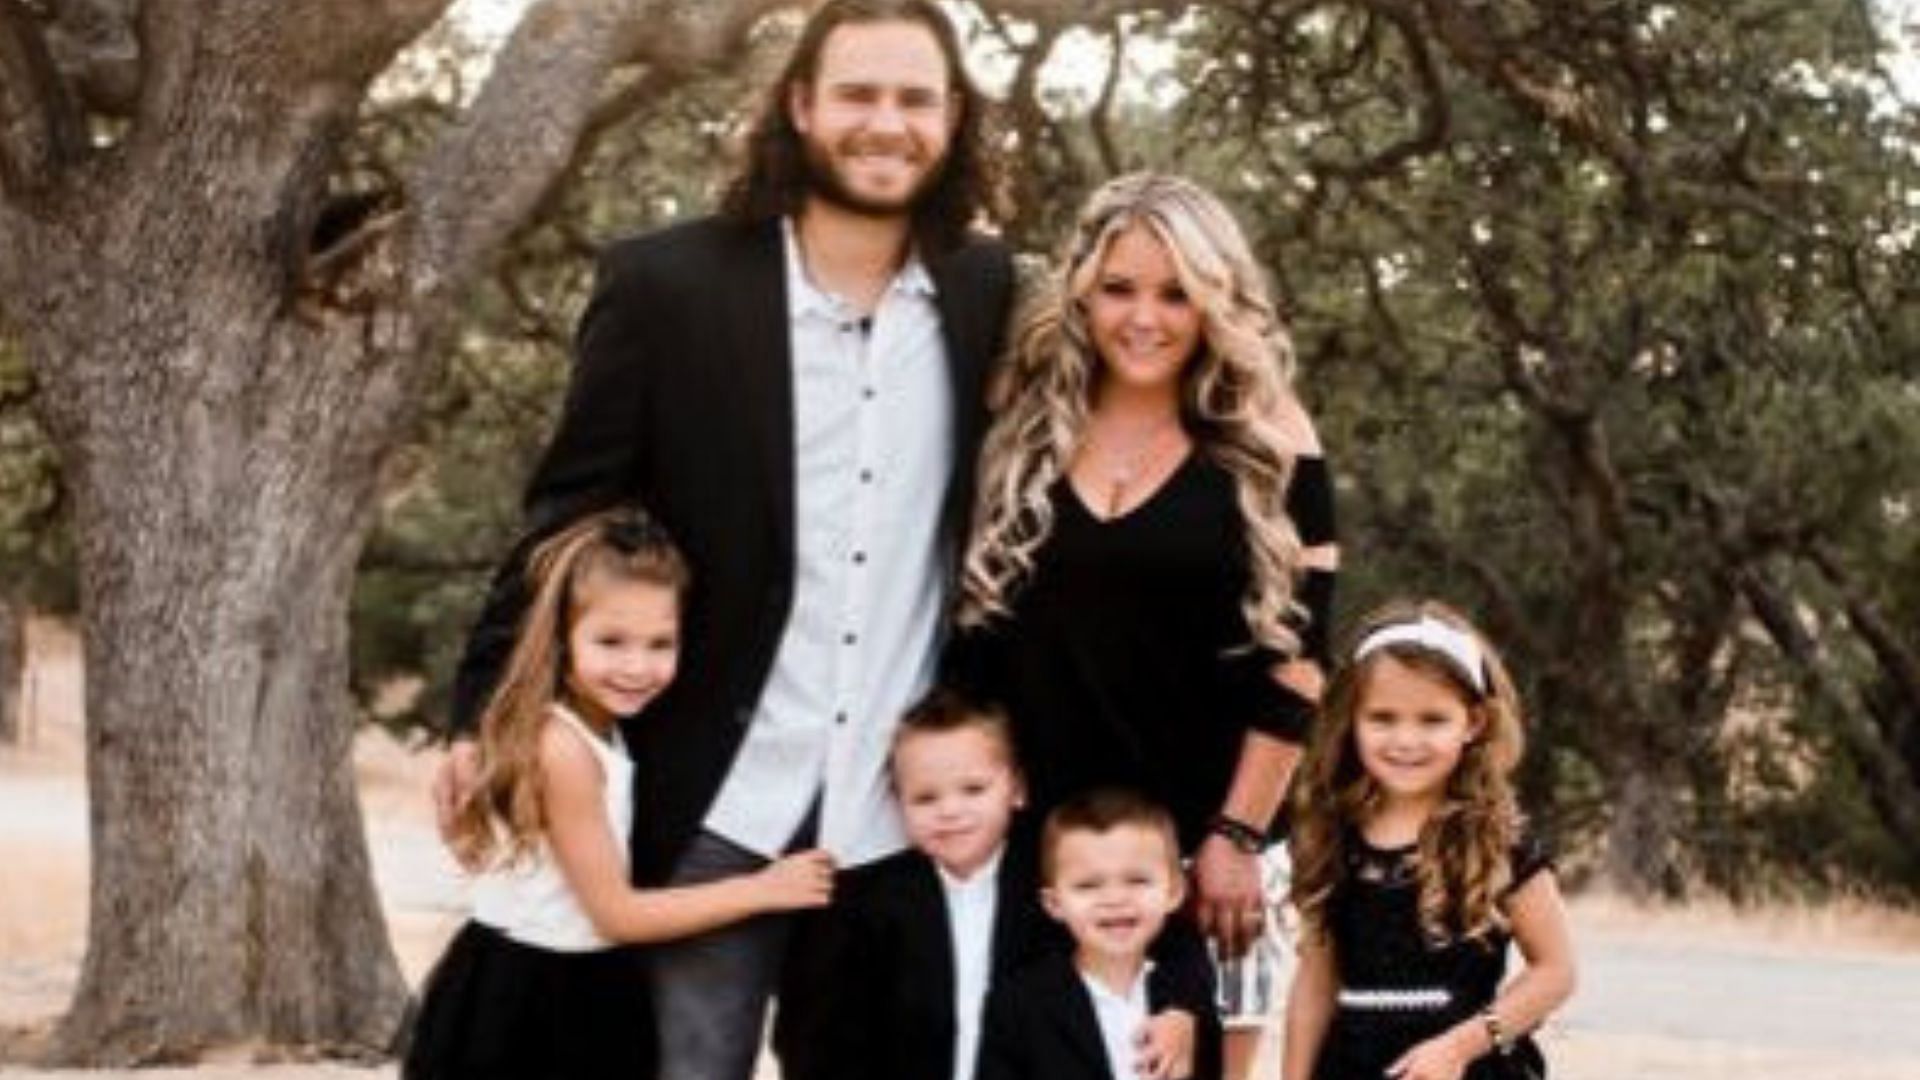 San Francisco Giants shortstop Brandon Crawford unwinds with family fun on  his off-day